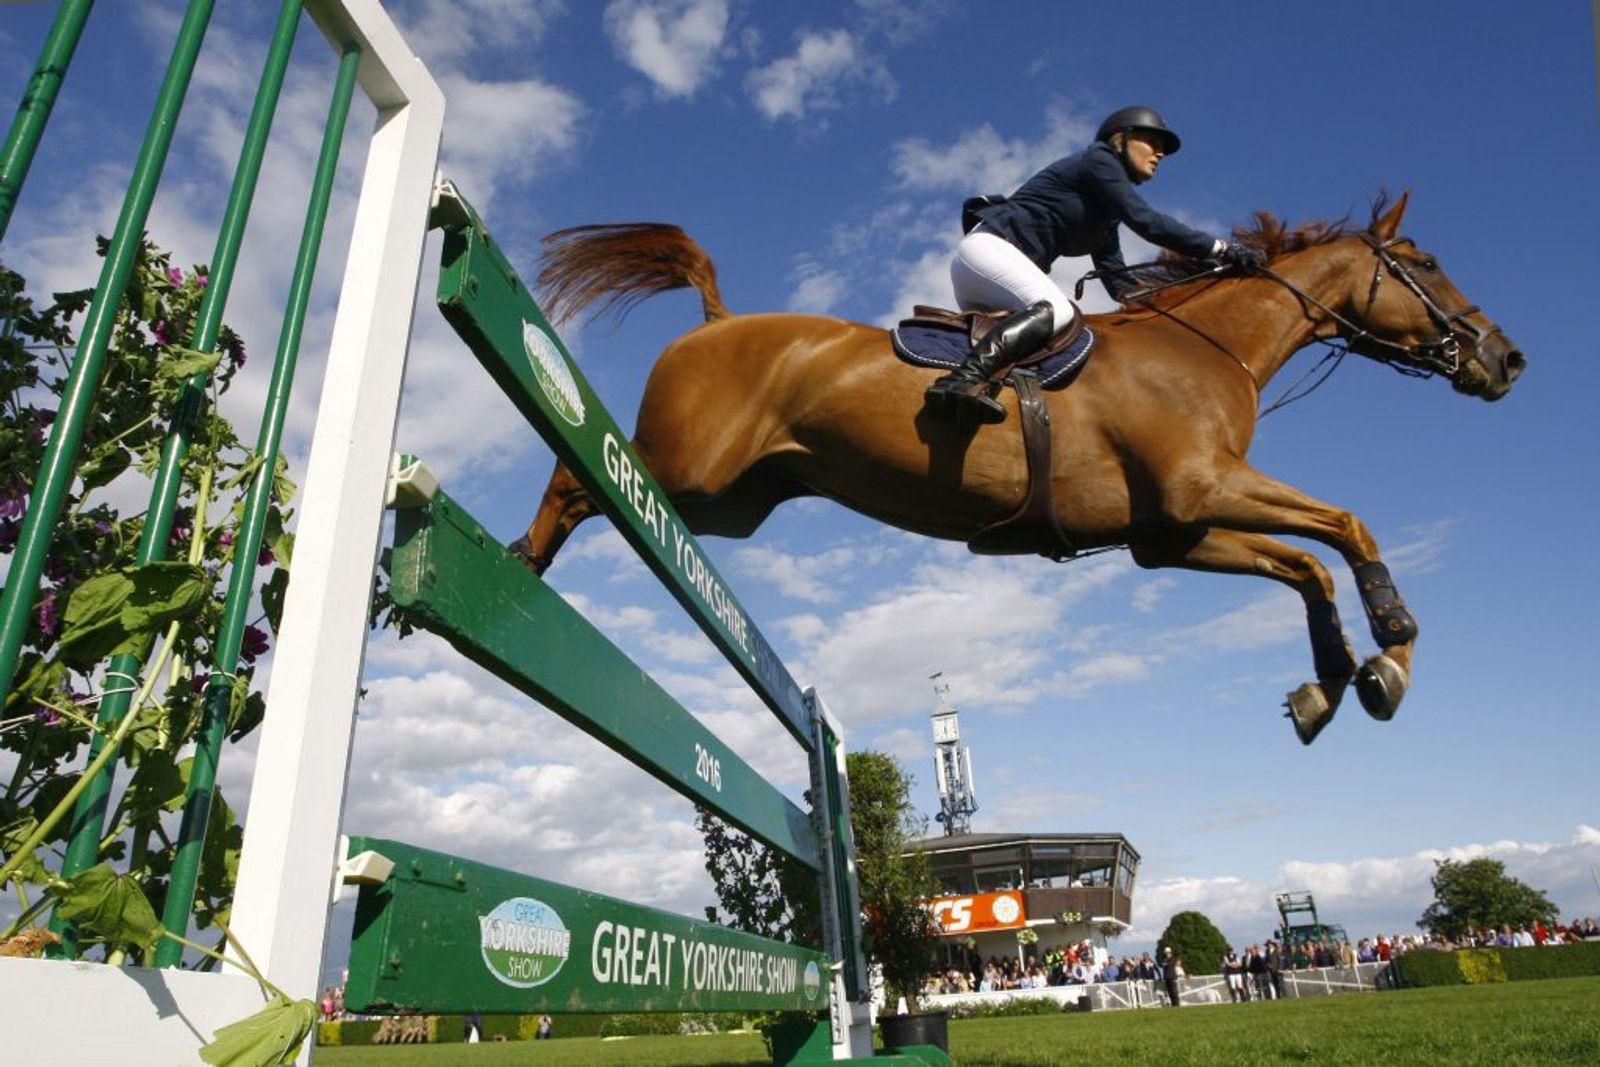 The Great Yorkshire Show, annual 3 day event each July